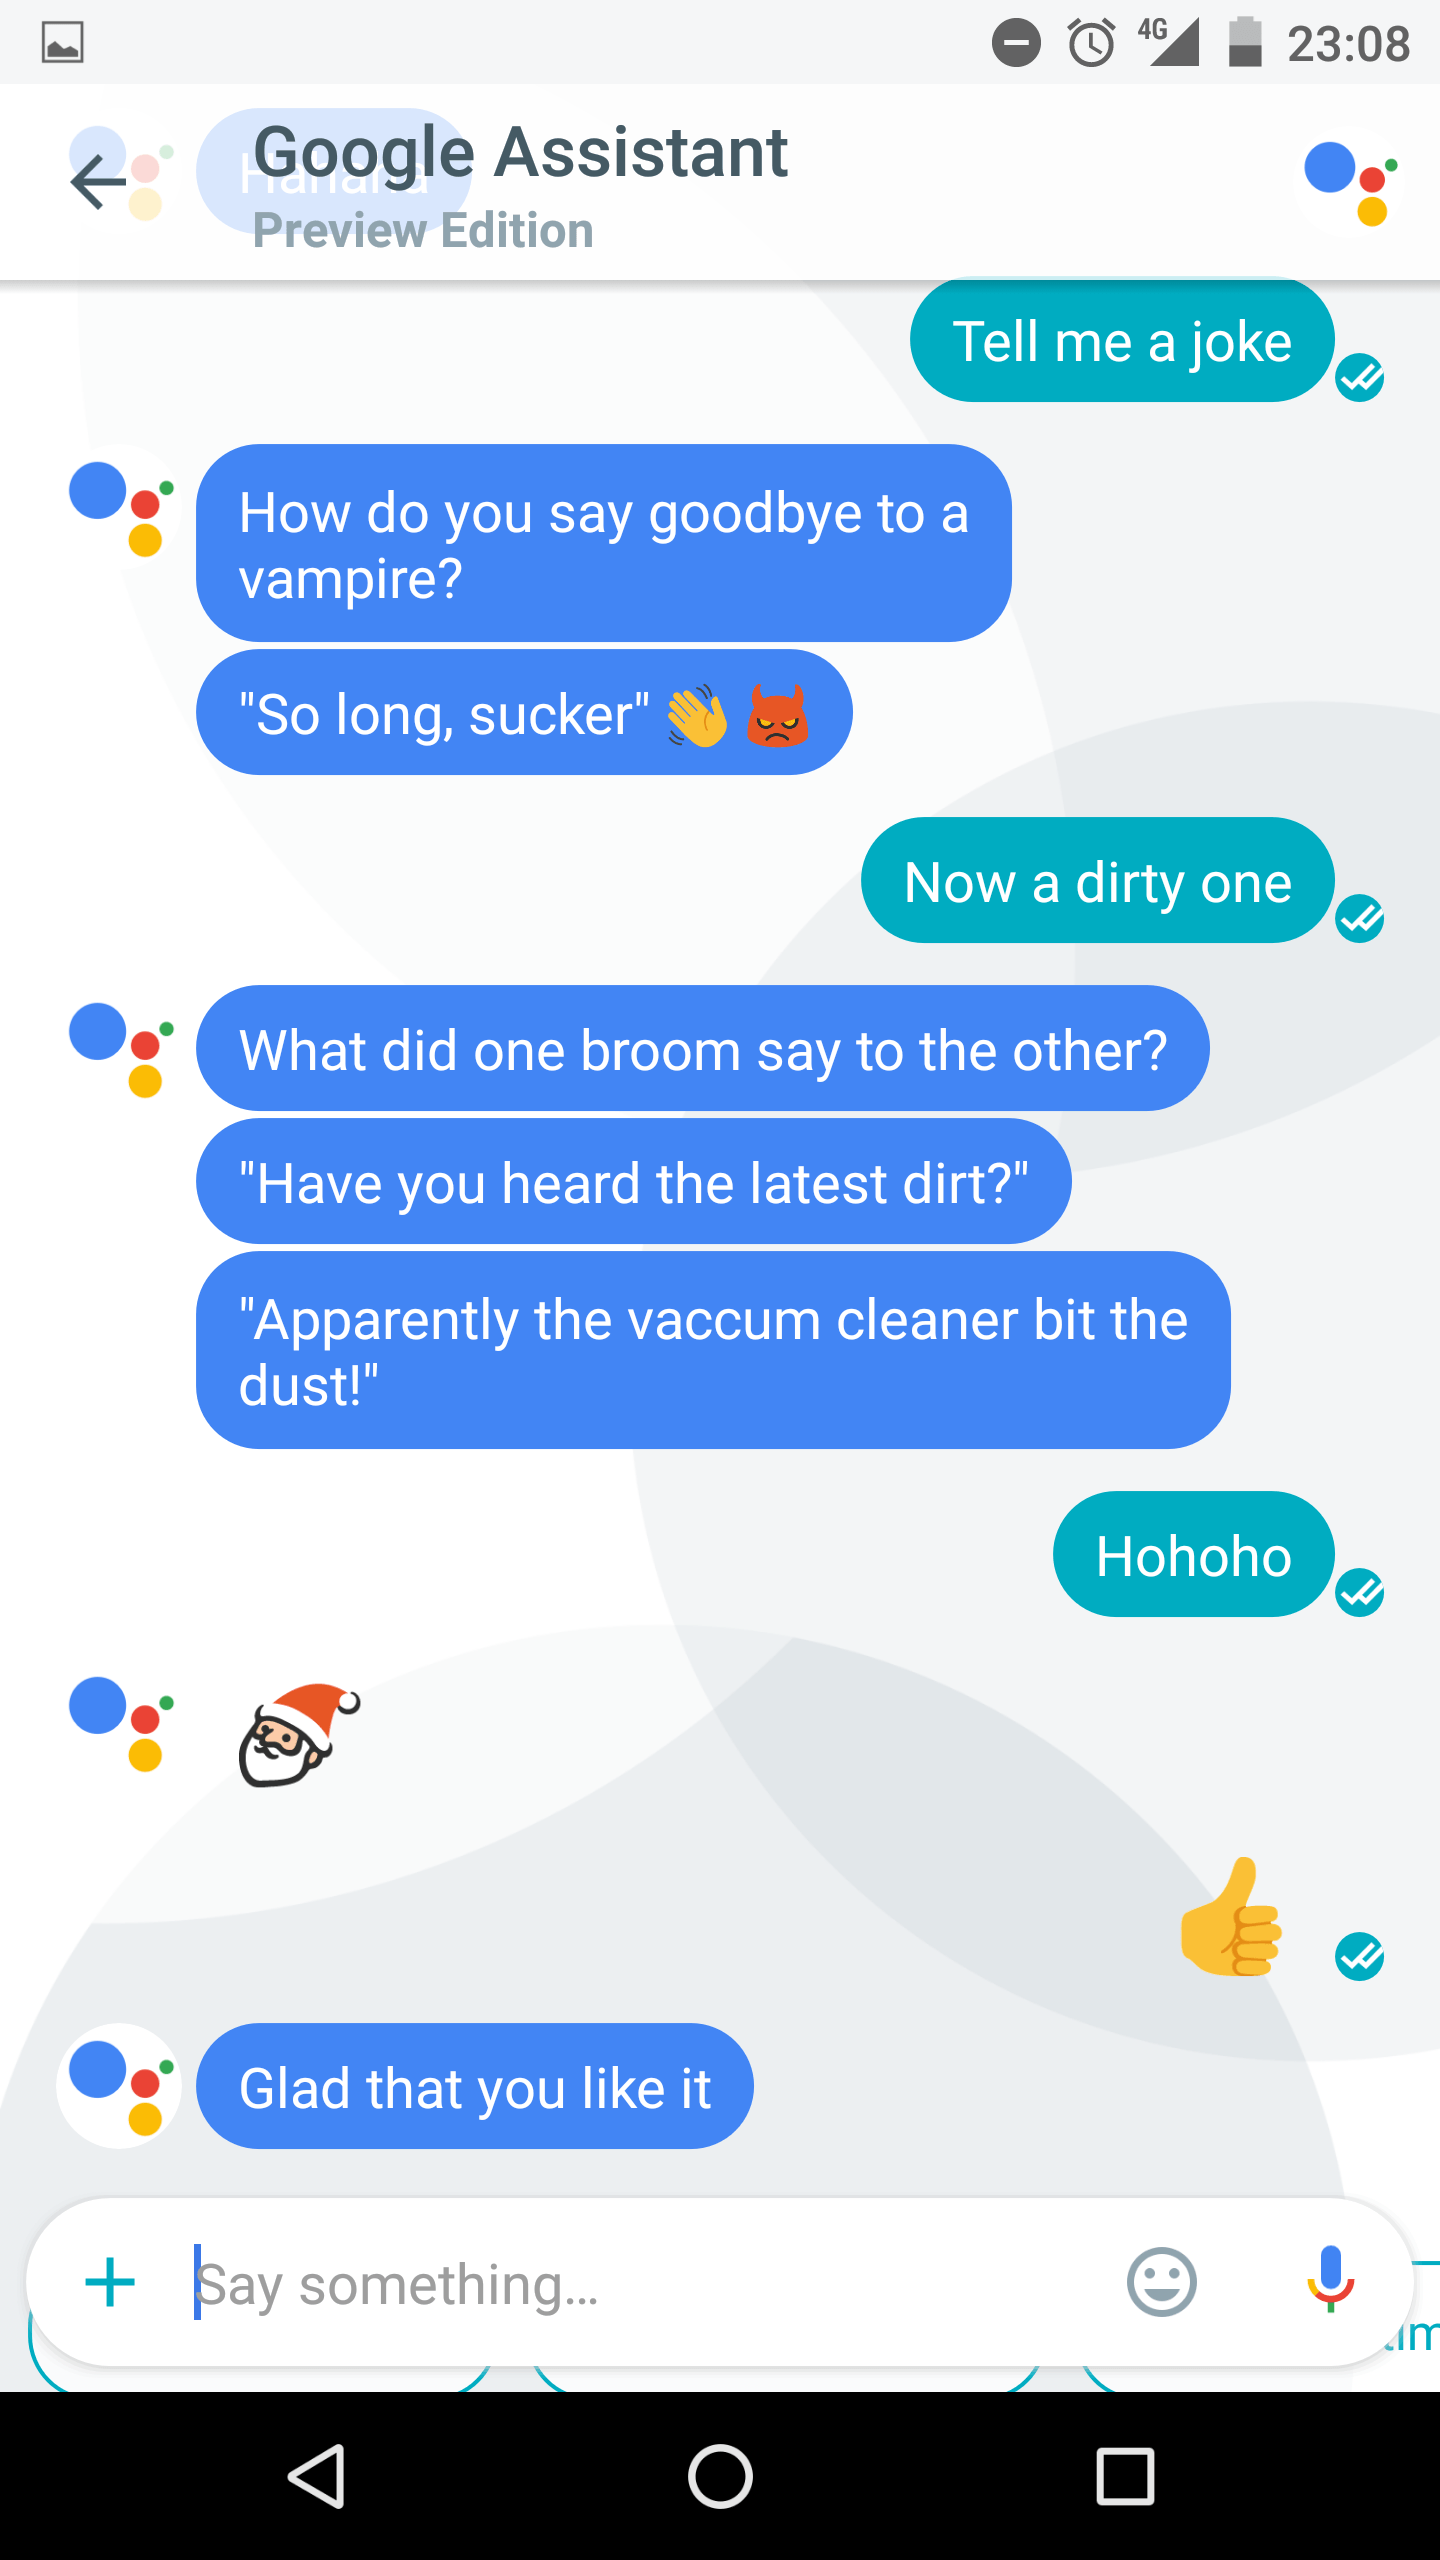 Sexy Google Logo - Not sure if Google assistant is bad, or very good at avoiding sexy ...